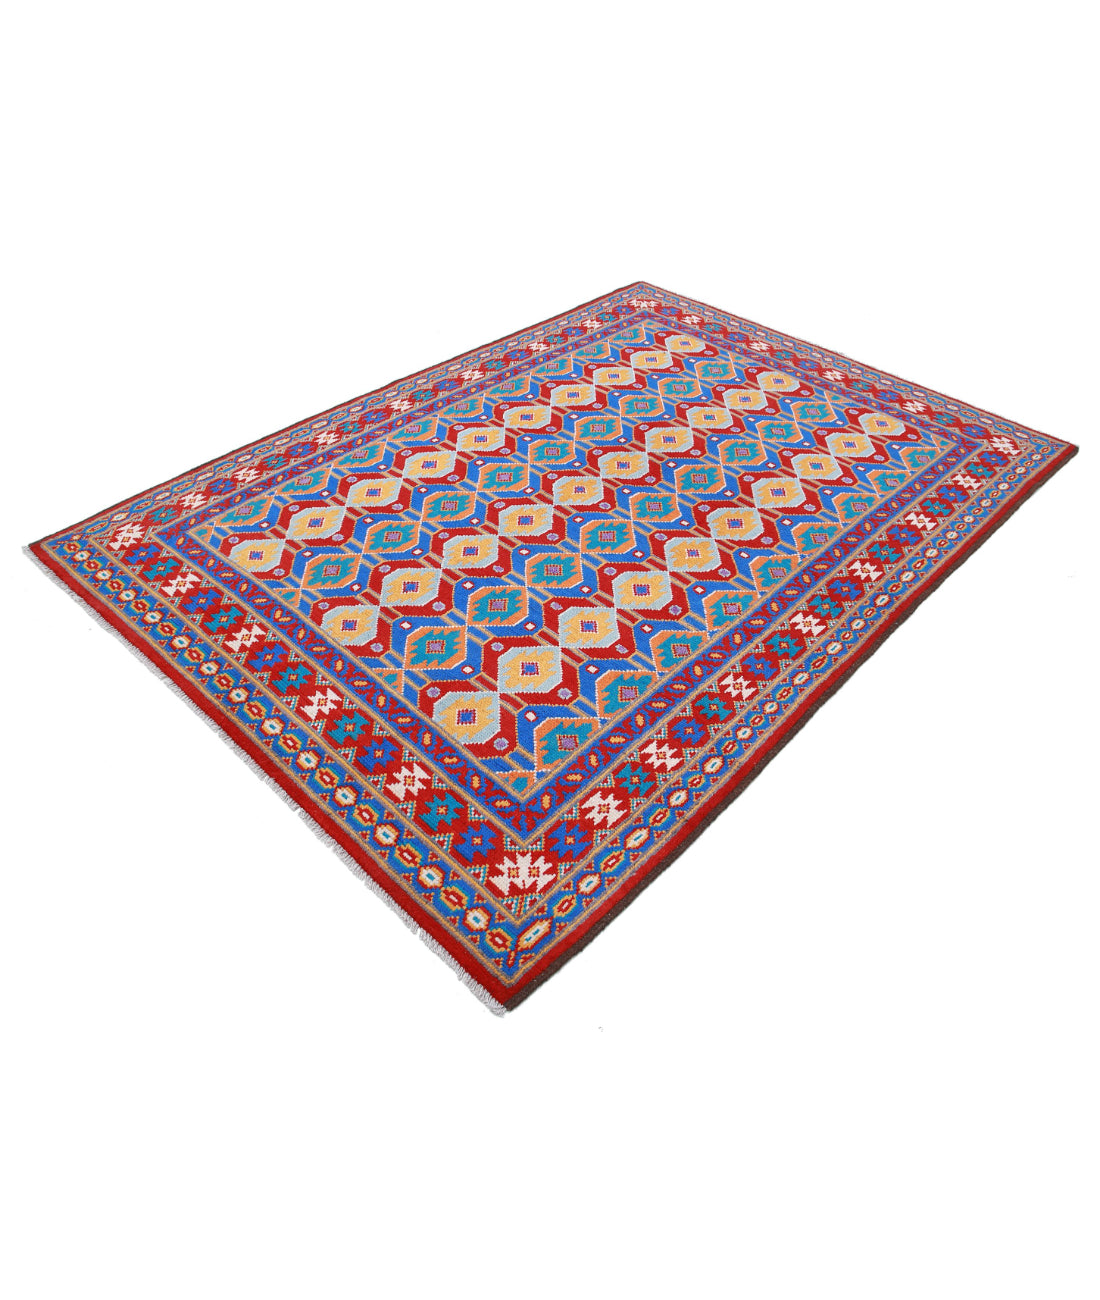 Revival 5'9'' X 8'1'' Hand-Knotted Wool Rug 5'9'' x 8'1'' (173 X 243) / Red / Blue